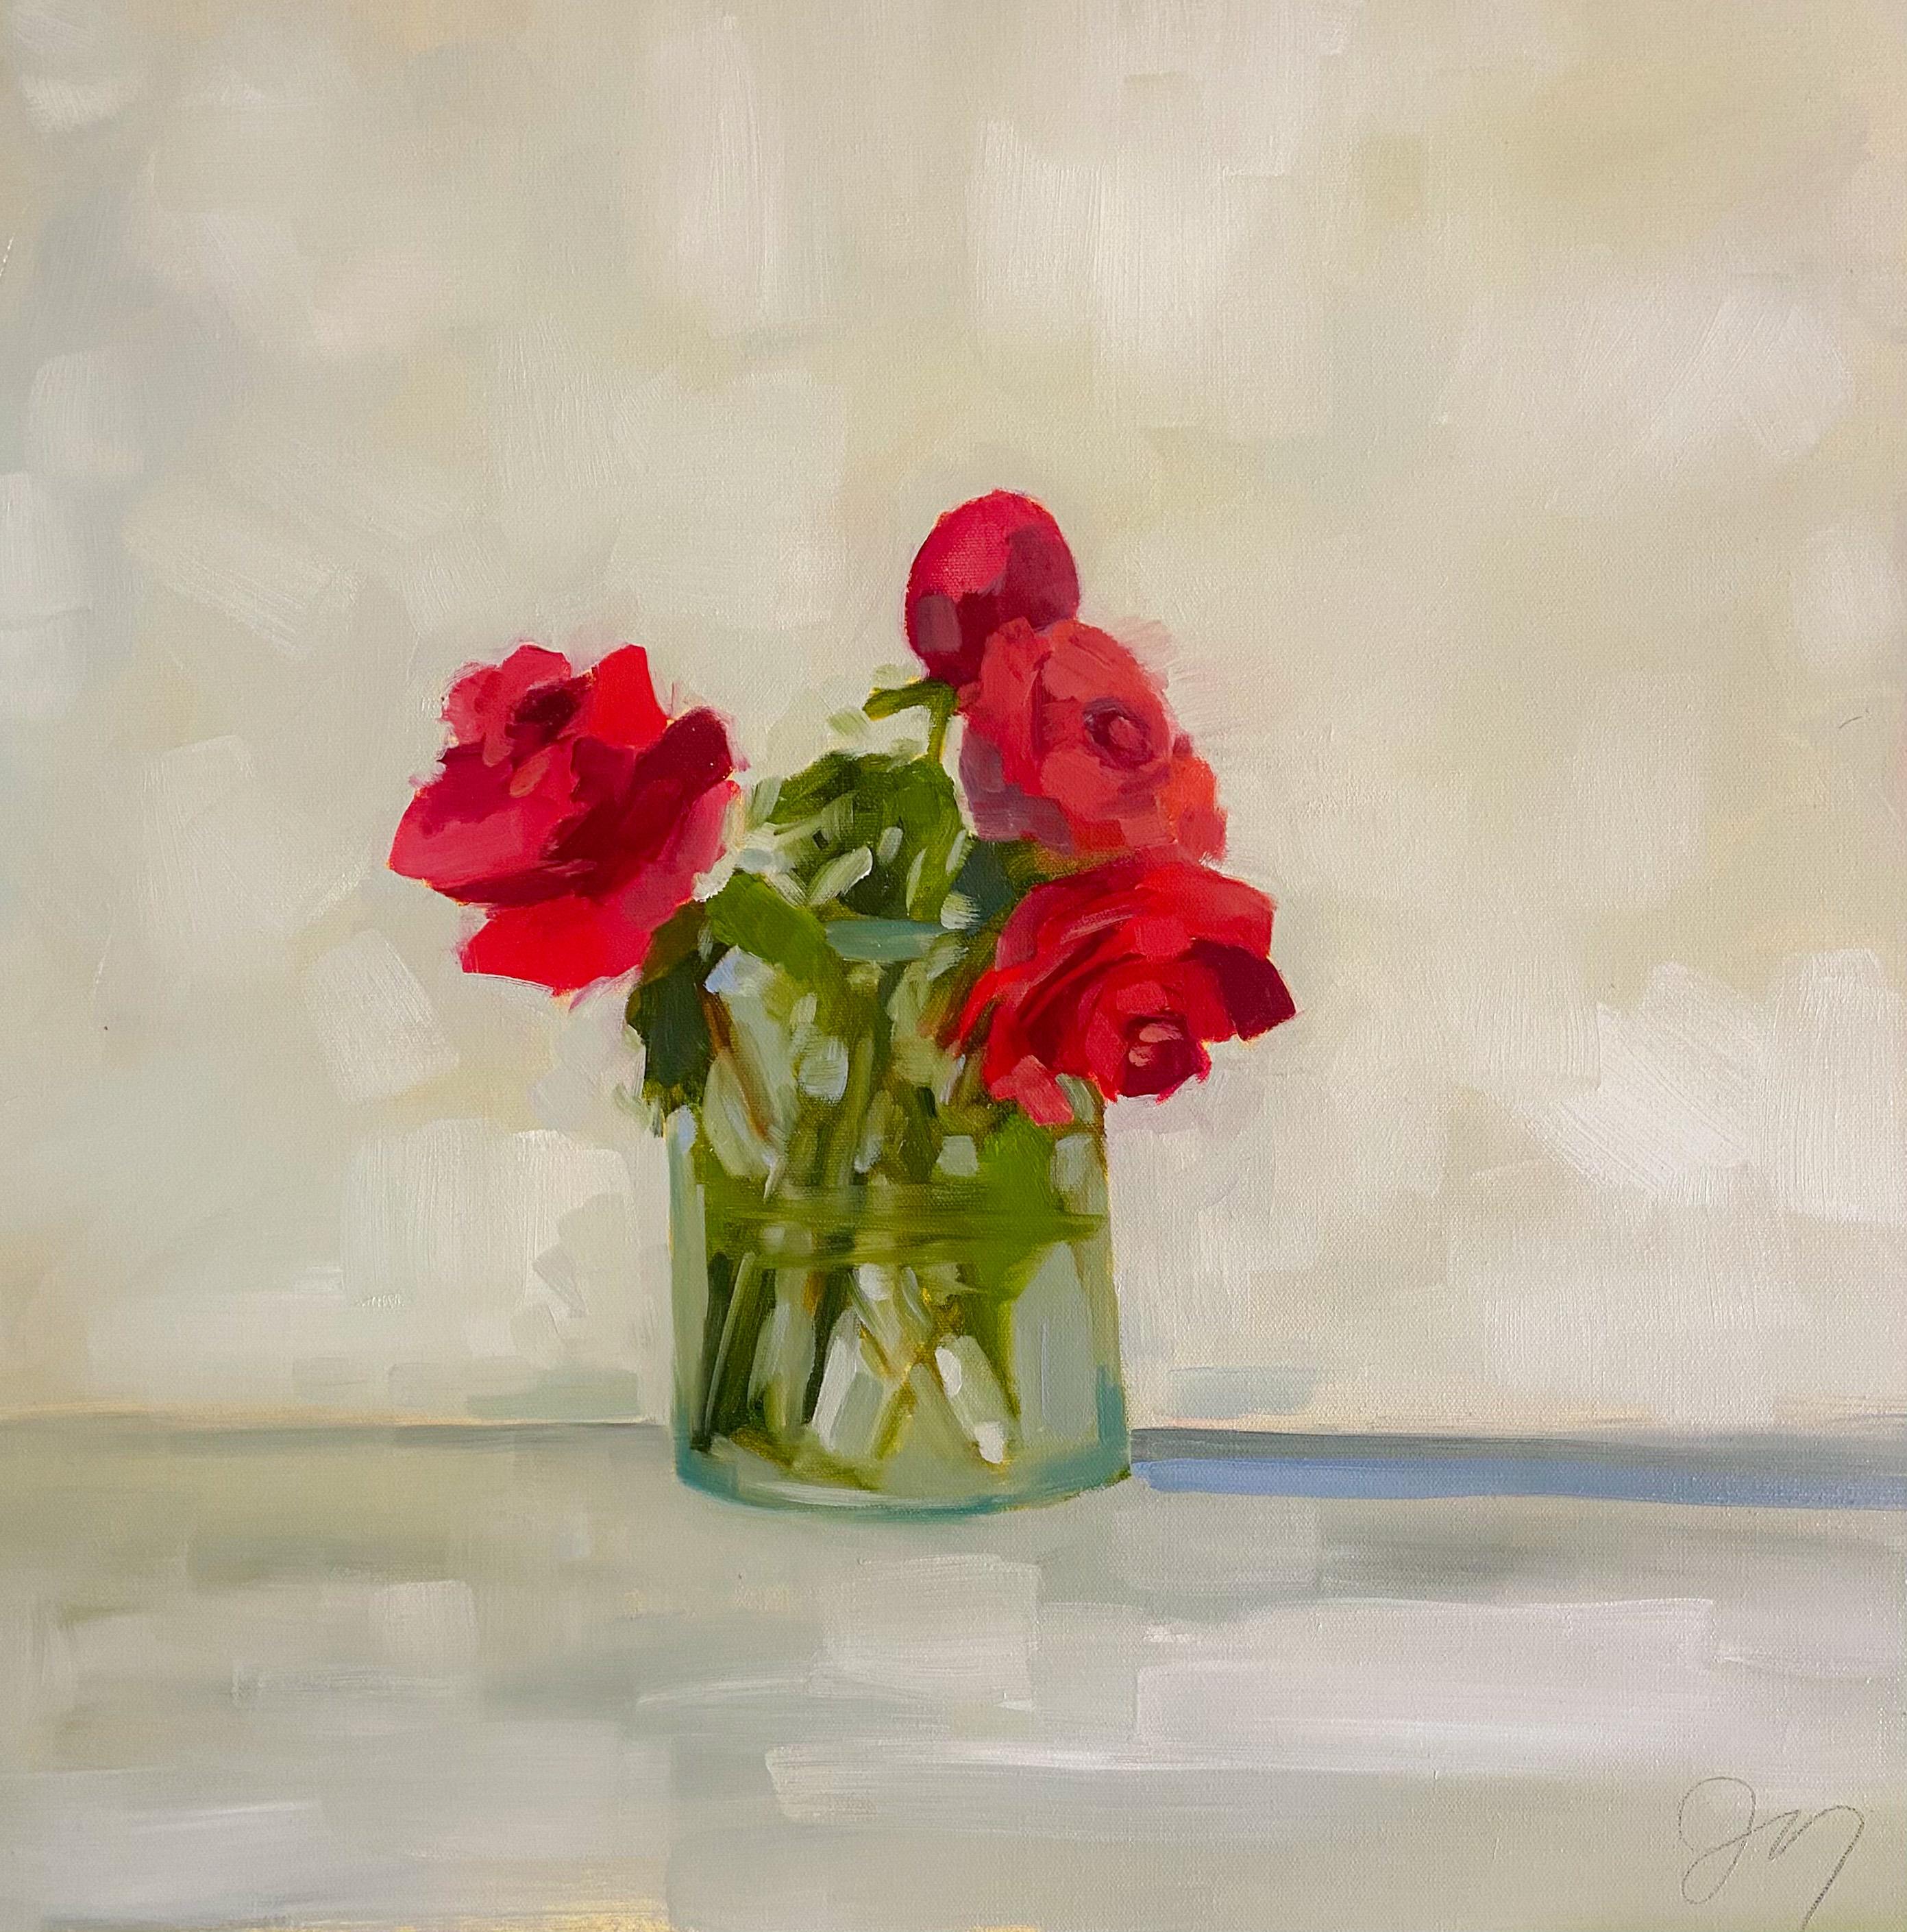 Jill Matthews Figurative Painting - "Reds" impressionist style oil painting of a bouquet of red roses in glass vase